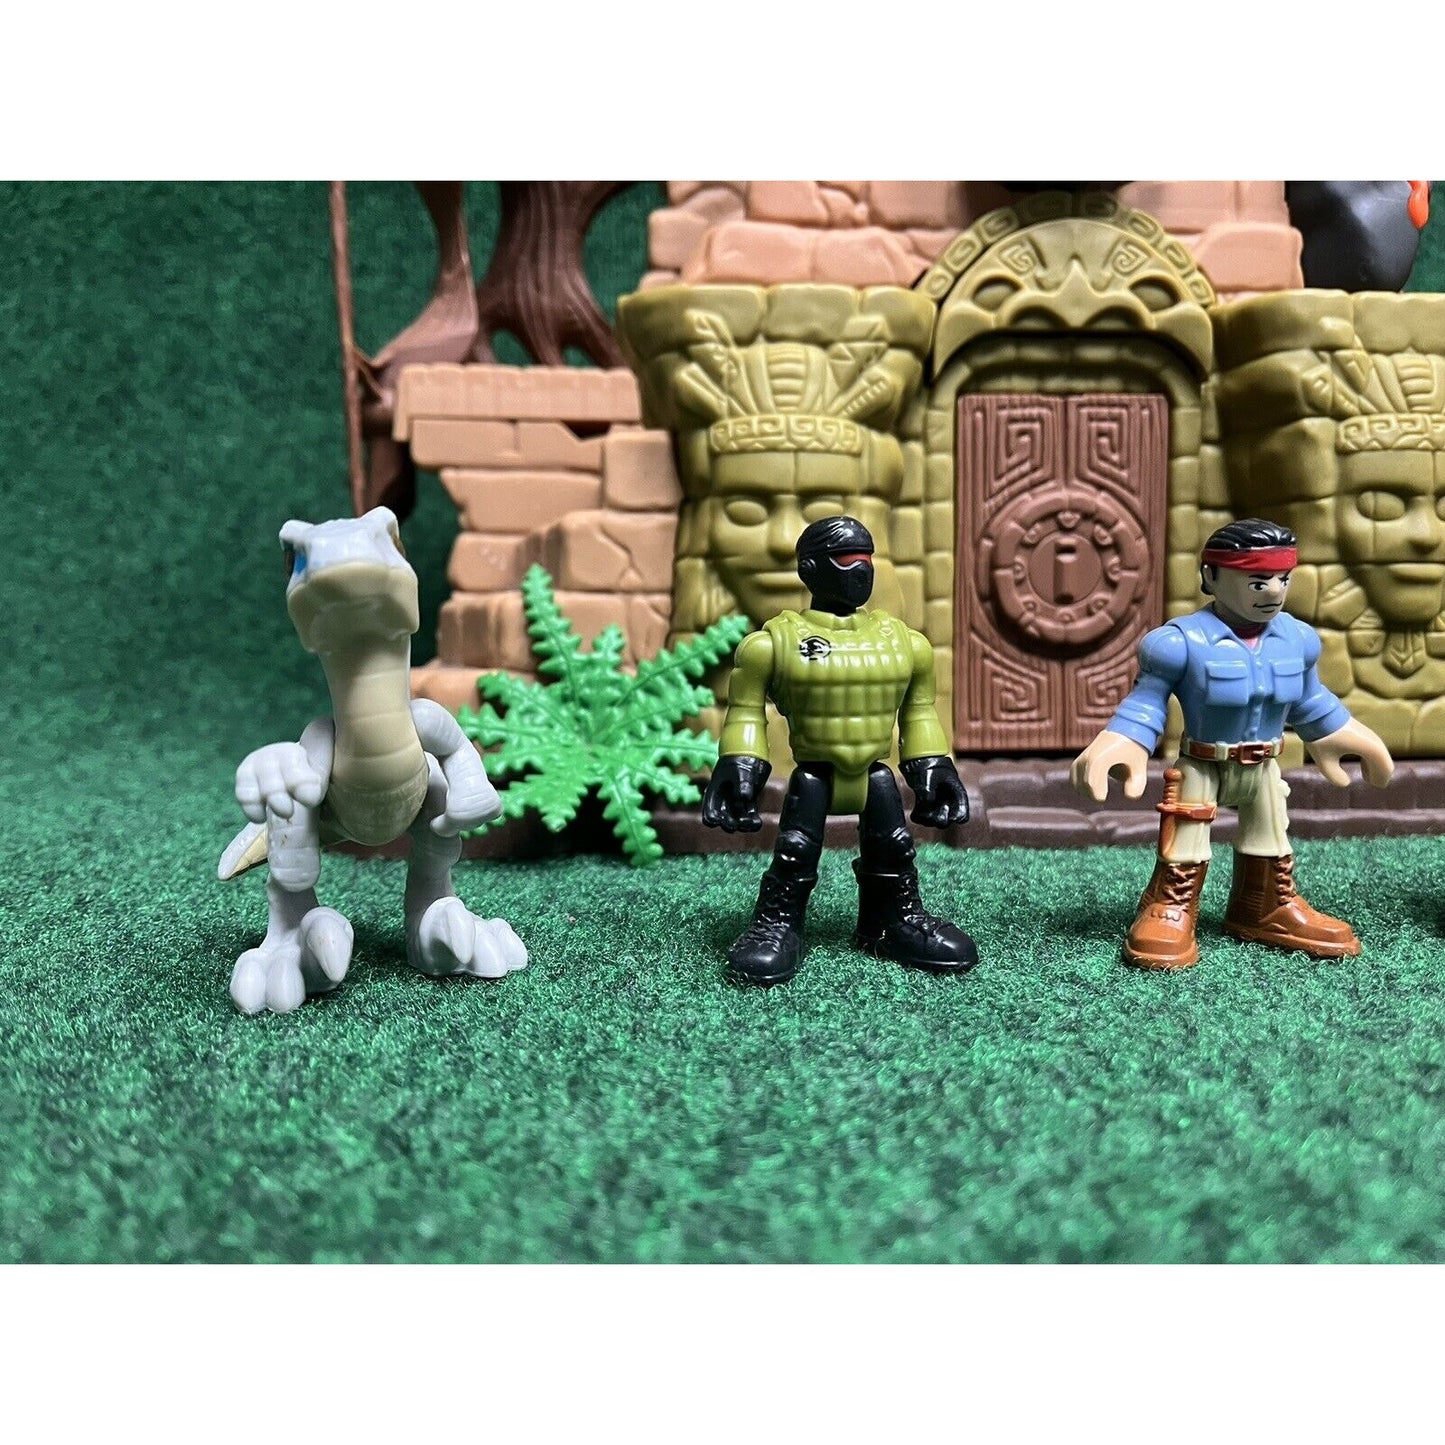 Fisher Price Imaginext Dino Fortress w/ T-rex Catapult Dinosaur & Figures